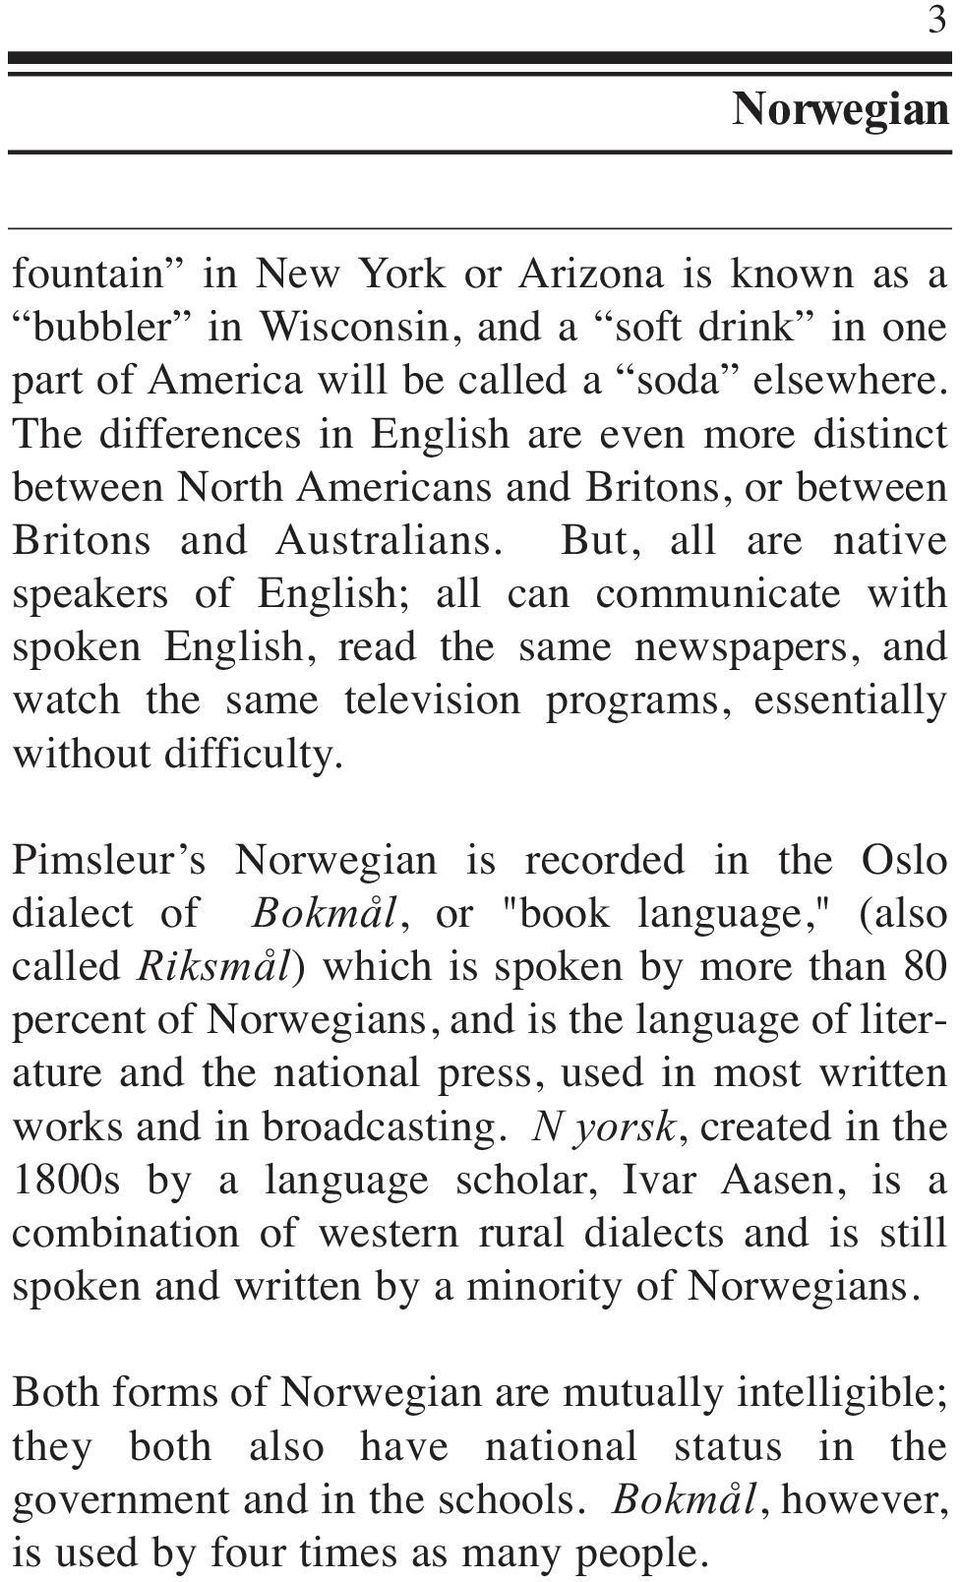 But, all are native speakers of English; all can communicate with spoken English, read the same newspapers, and watch the same television programs, essentially without difficulty.